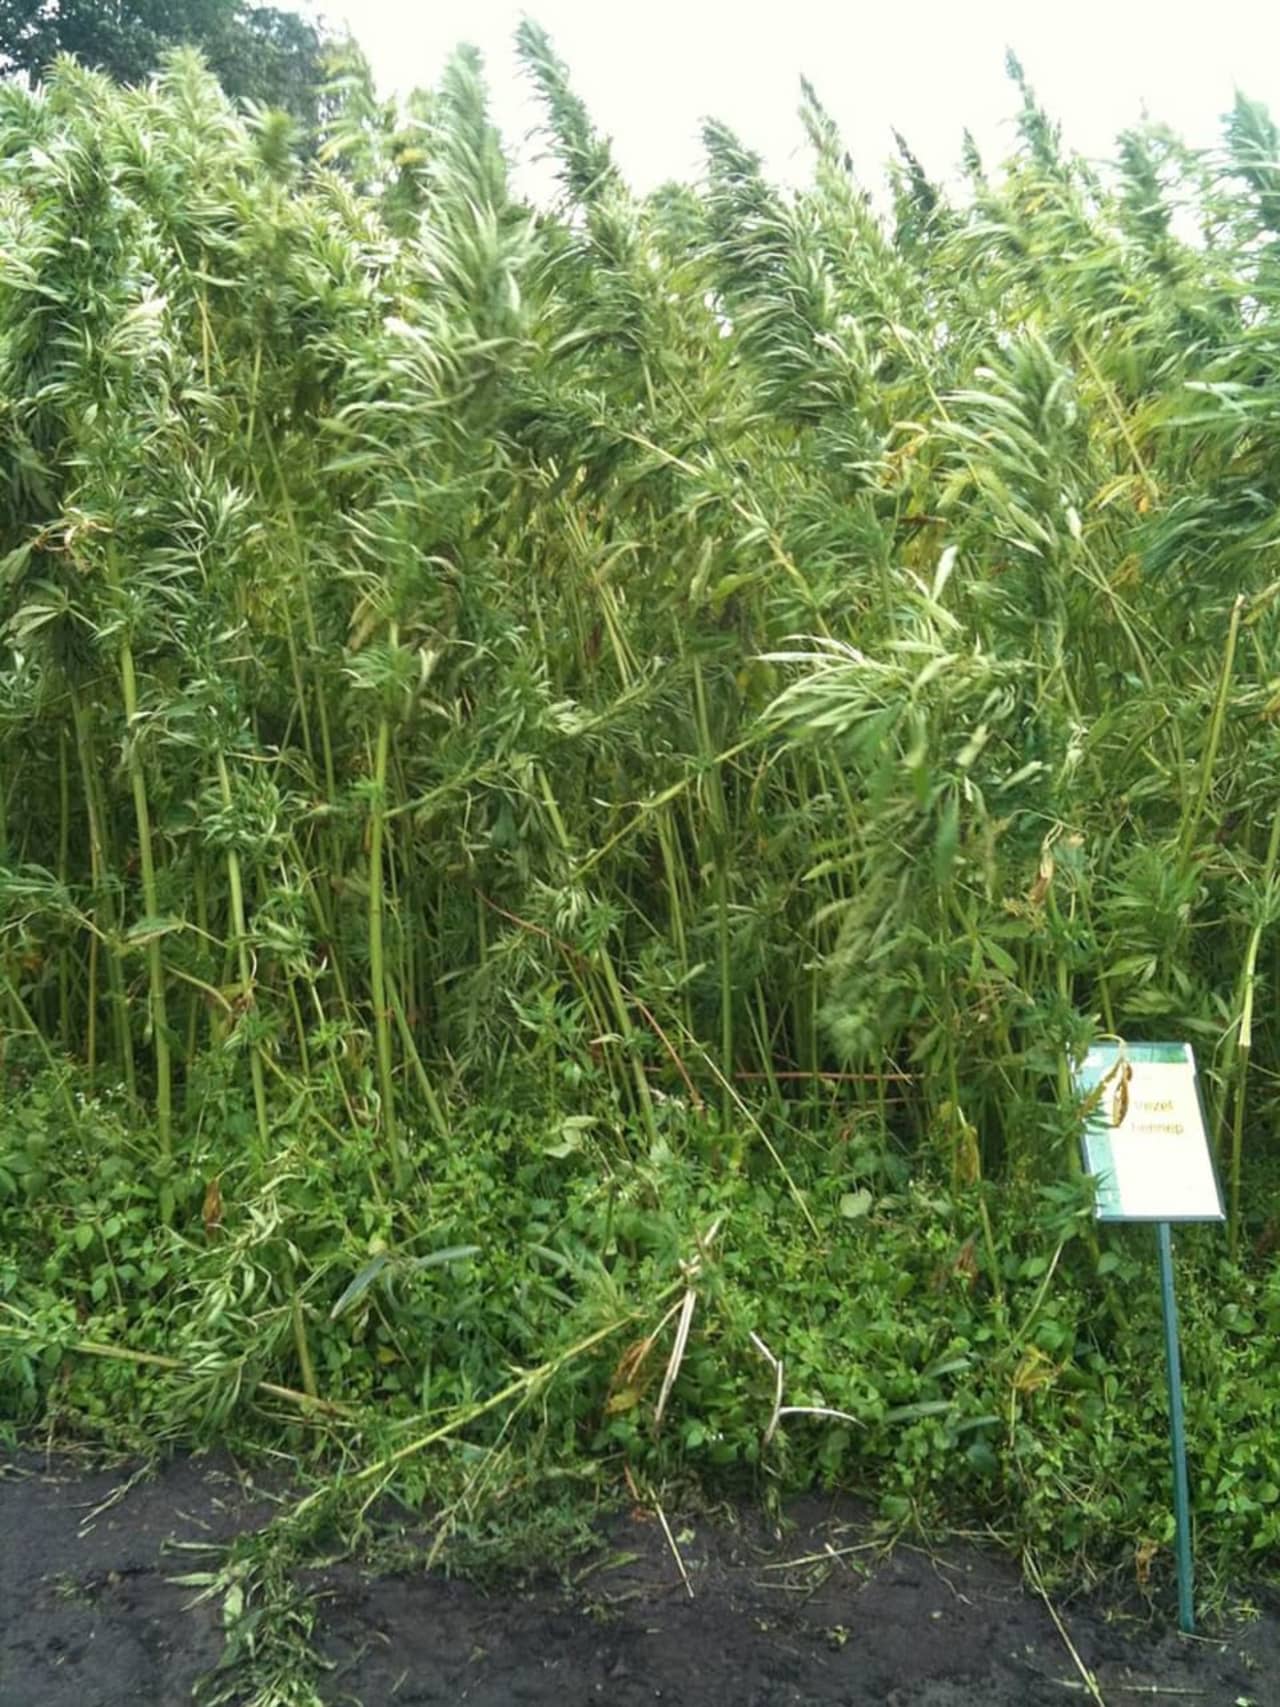 Hemp, a variety of the Cannabis sativa plant, is cultivated for its tough fibers, which are used to make cordage, fabric, biofuel and many other things. This photo shows plants being grown for animal food.